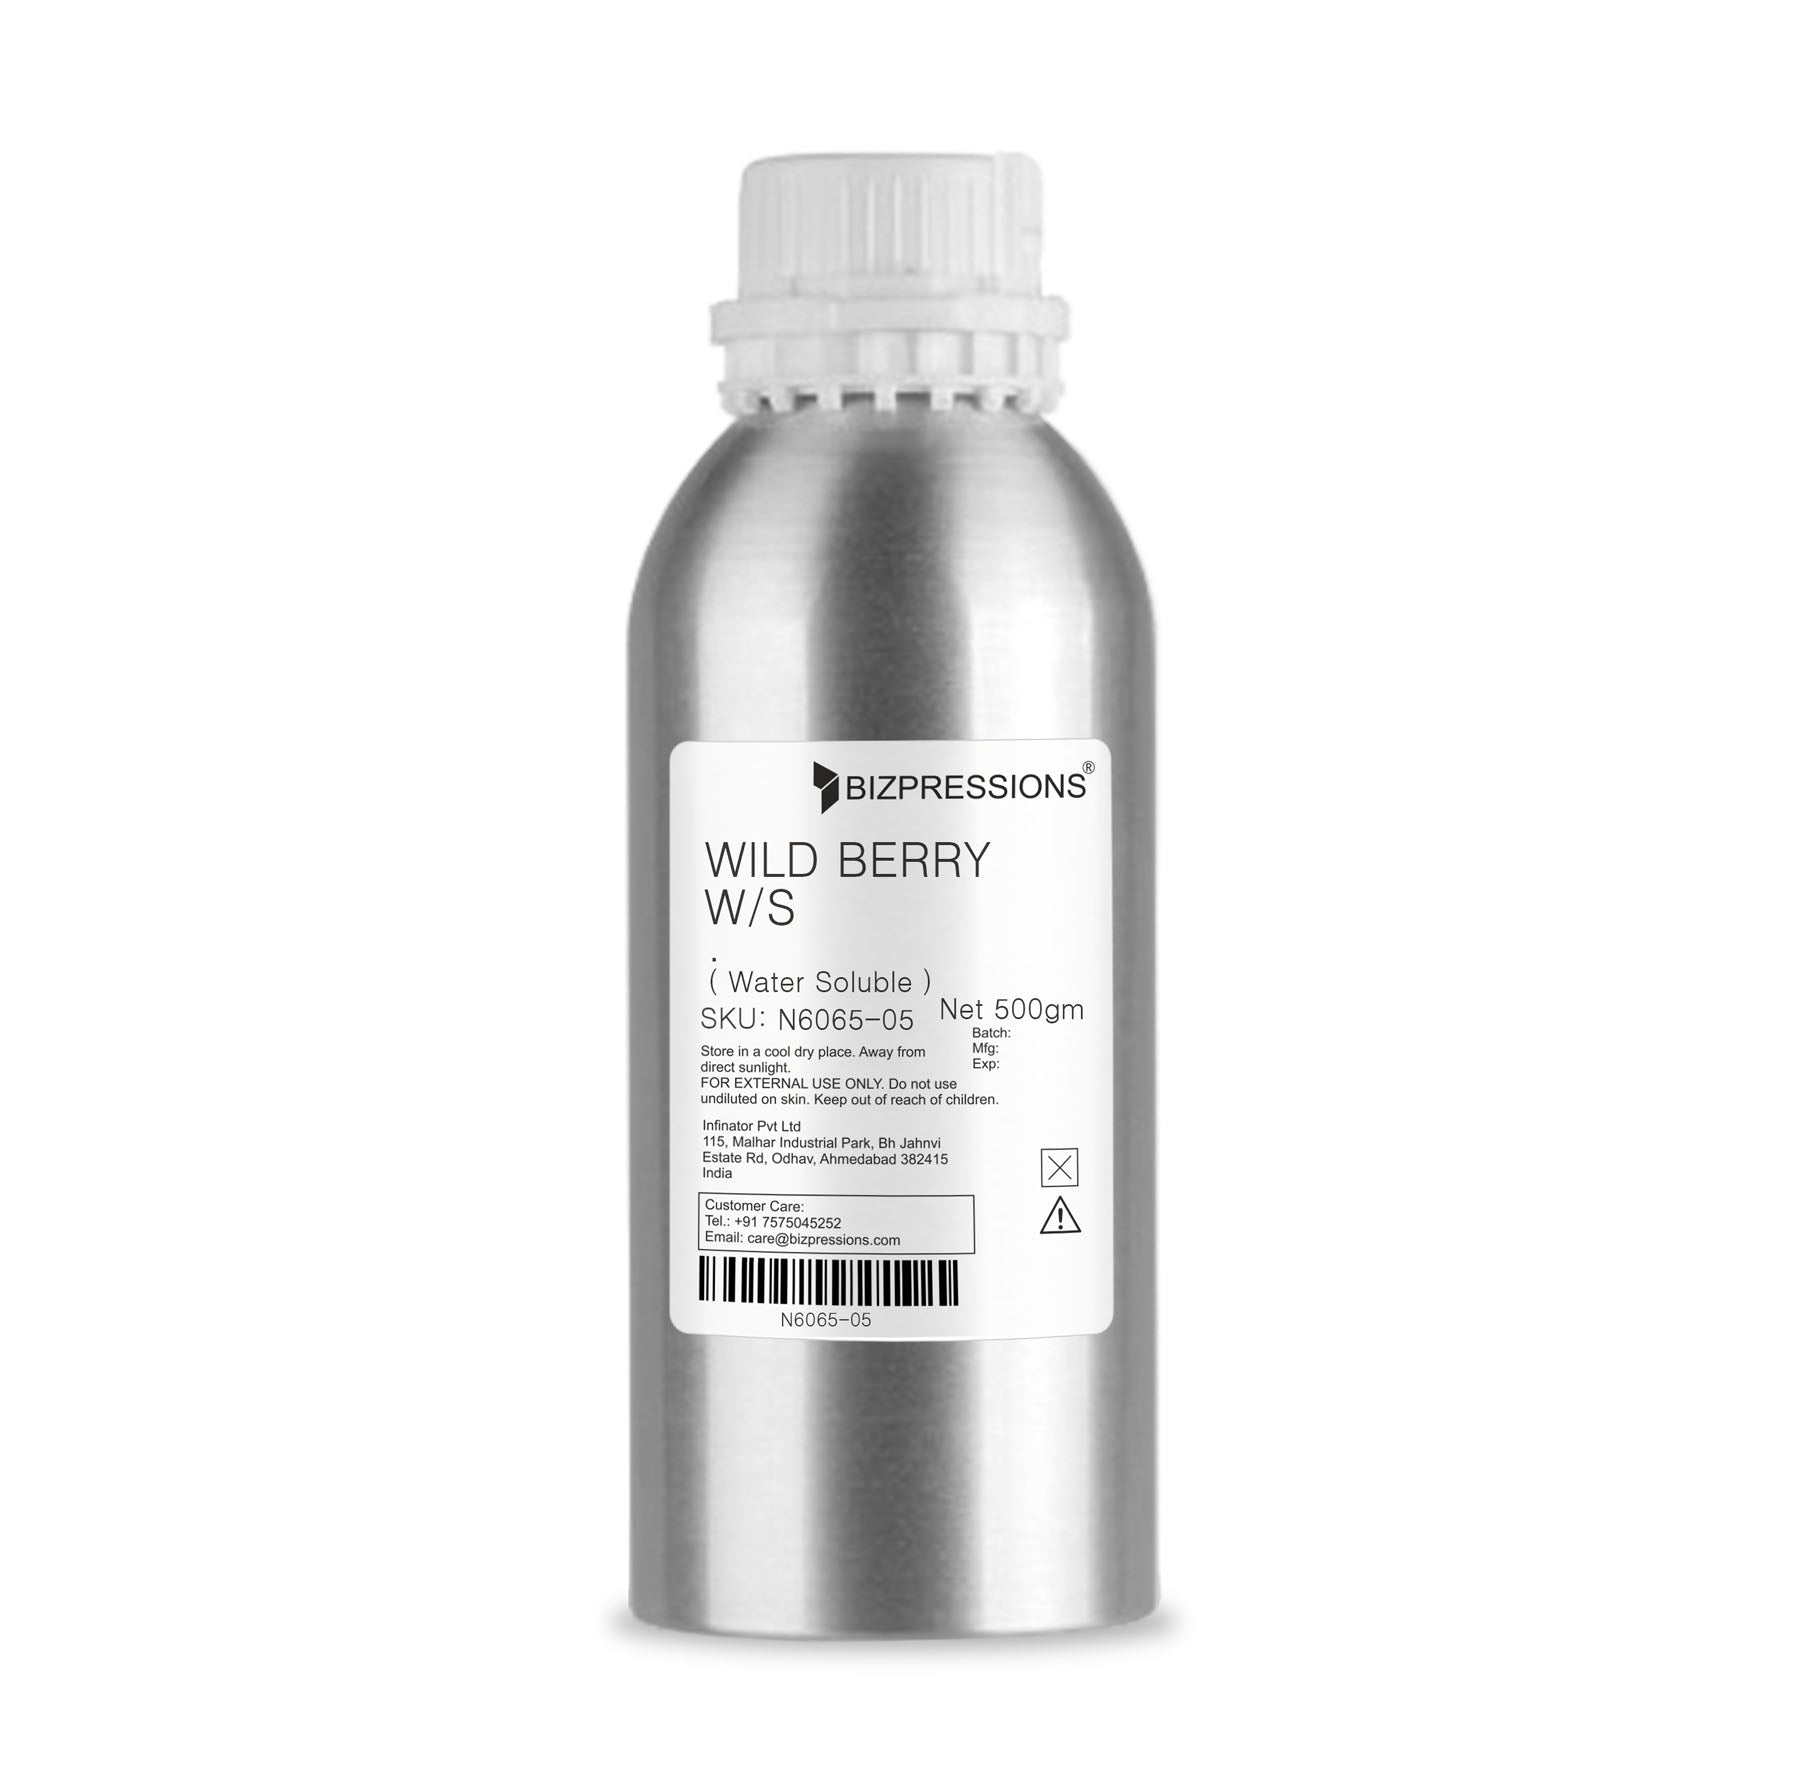 WILD BERRY W/S - Fragrance ( Water Soluble ) - 500 gm